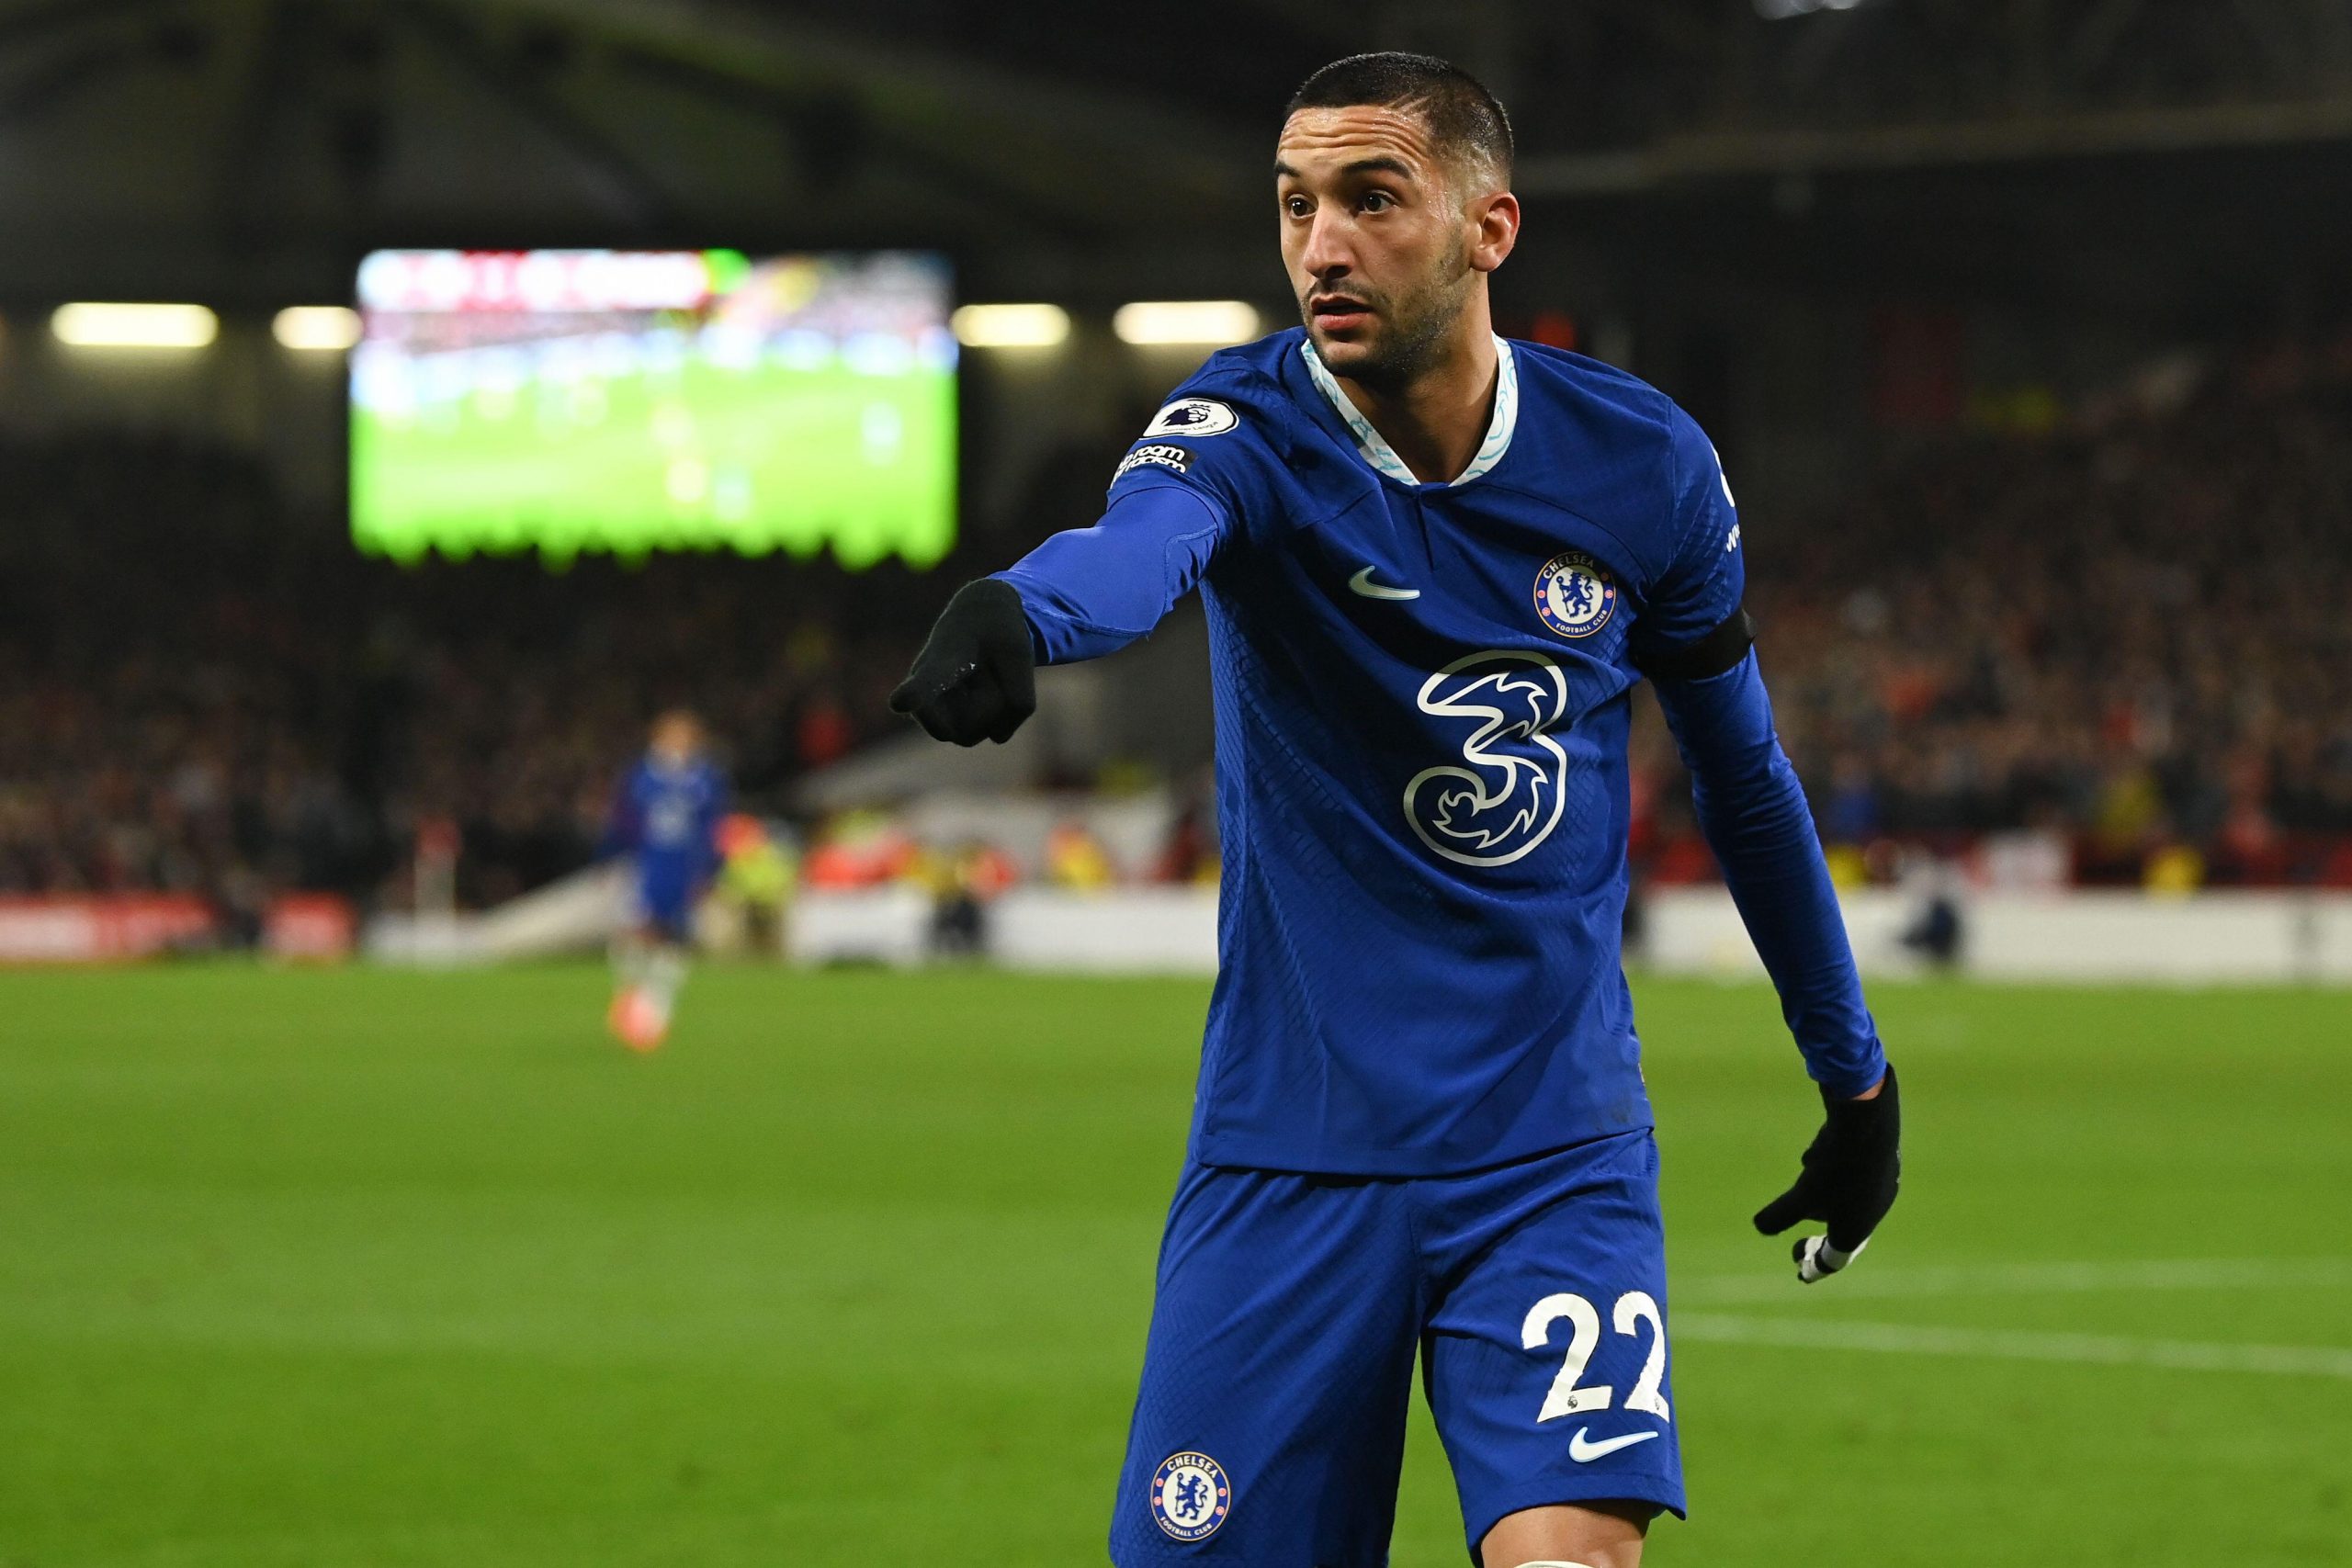 Chelsea winger Hakim Ziyech will move to PSG on loan